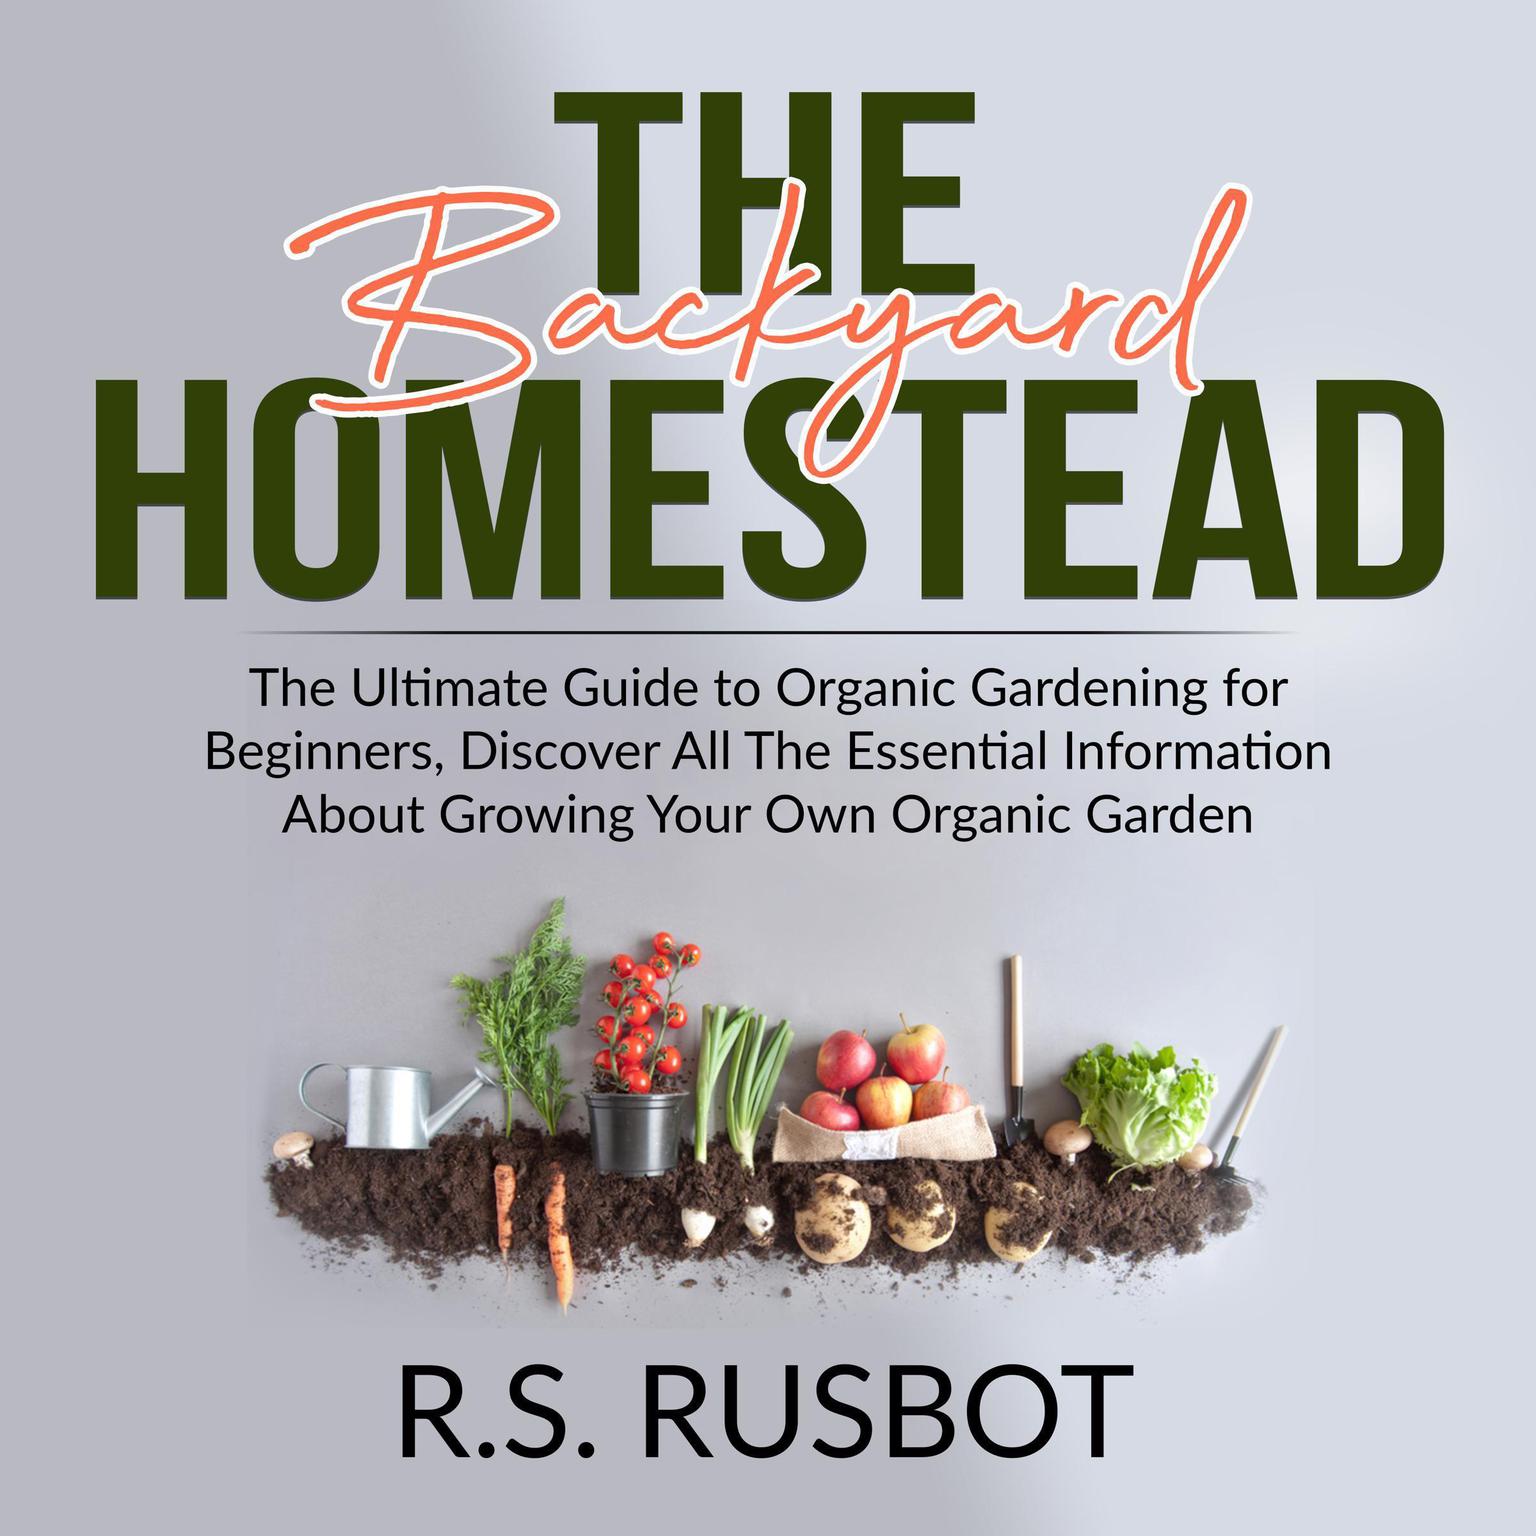 The Backyard Homestead: The Ultimate Guide to Organic Gardening for Beginners, Discover All The Essential Information About Growing Your Own Organic Garden: The Ultimate Guide to Organic Gardening for Beginners, Discover All The Essential Information About Growing Your Own Organic Garden Audiobook, by R.S. Rusbot